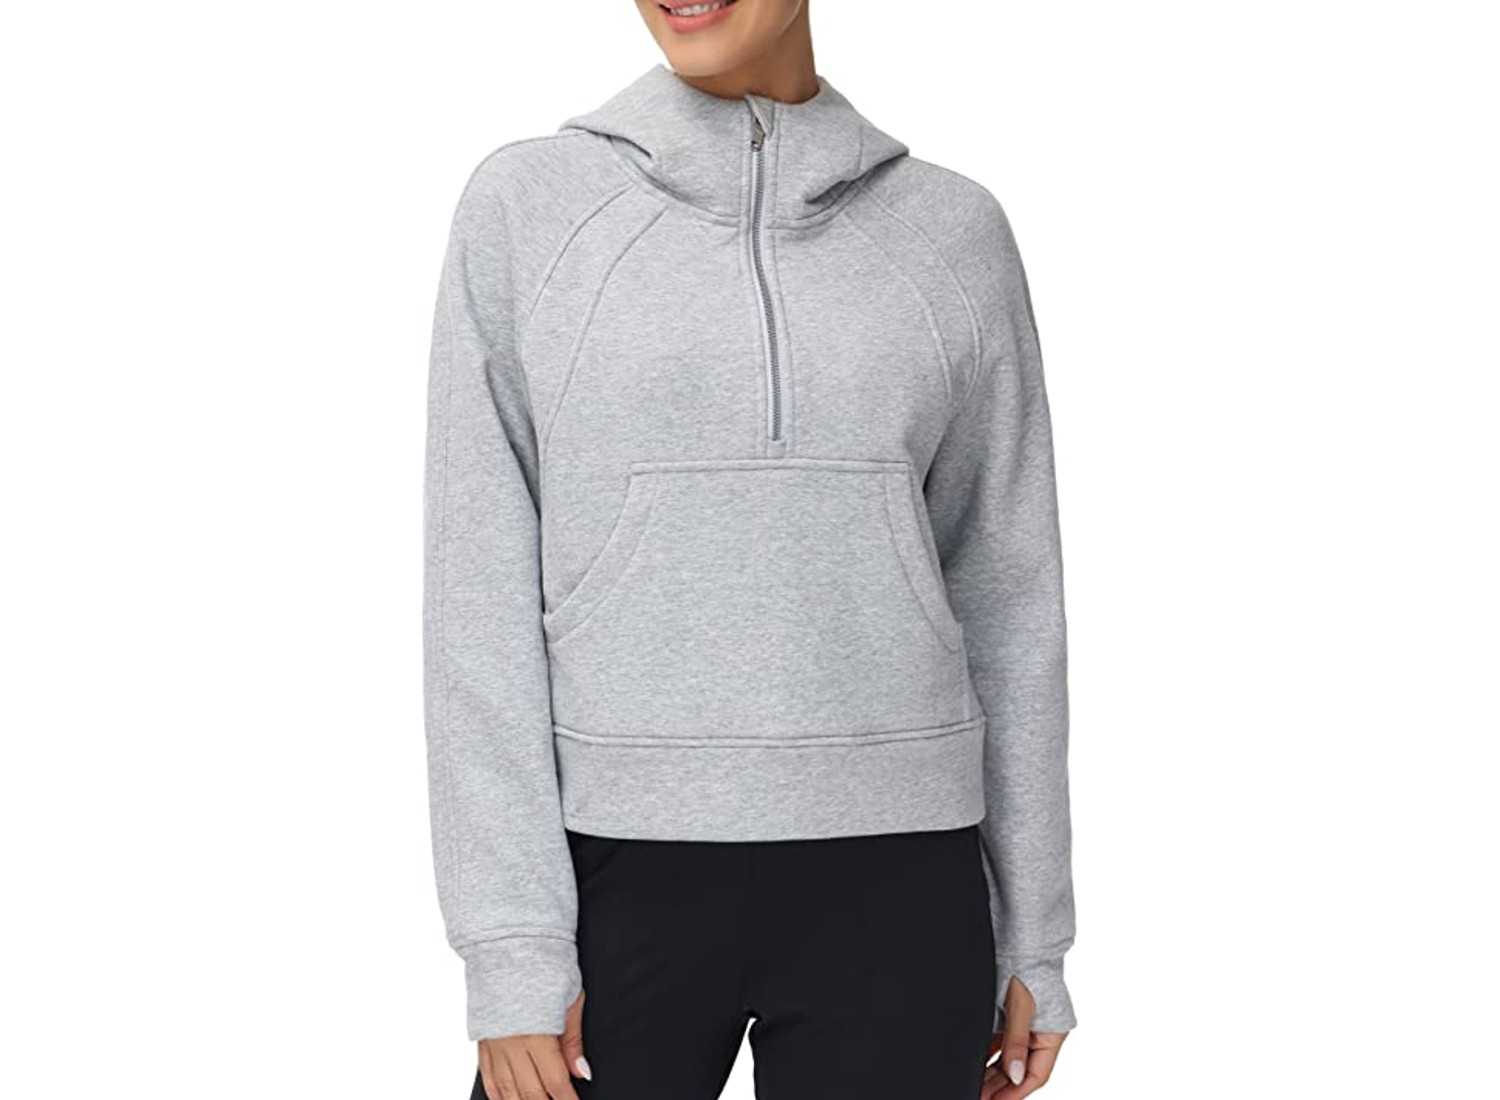 The Gym People Fleece Crop Pullover